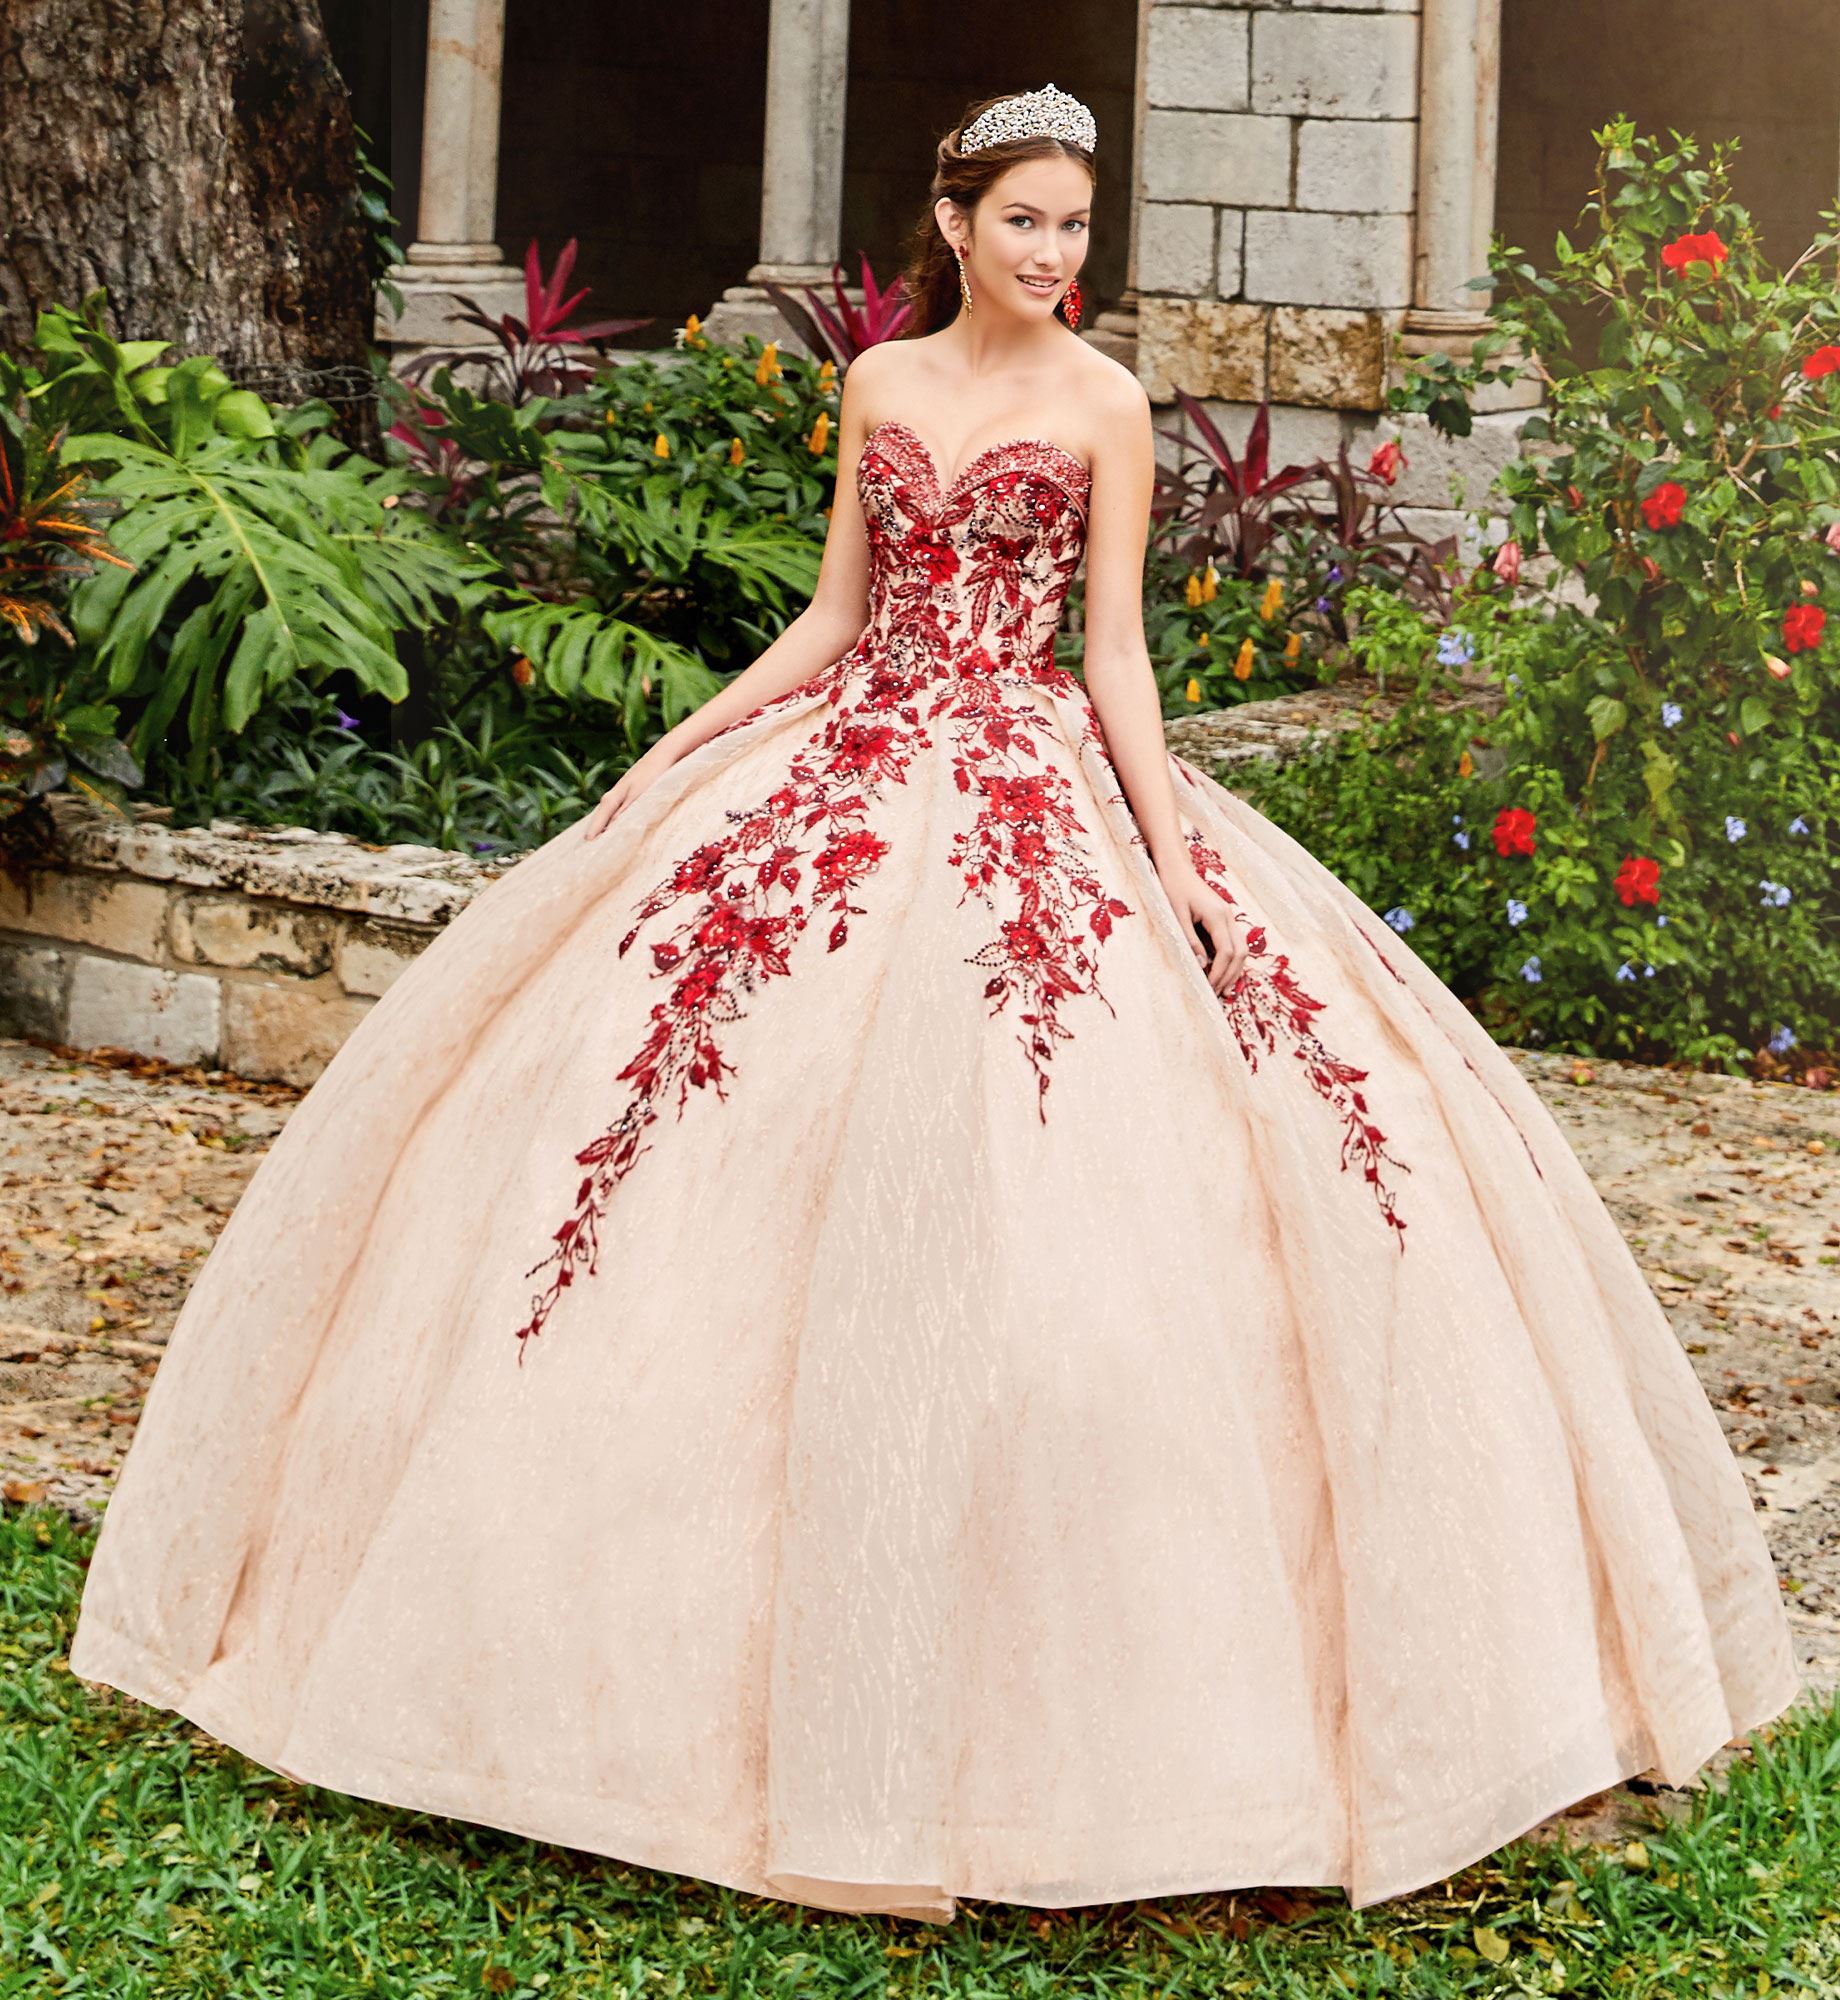 Brunette model in strapless red and gold quinceañera dress